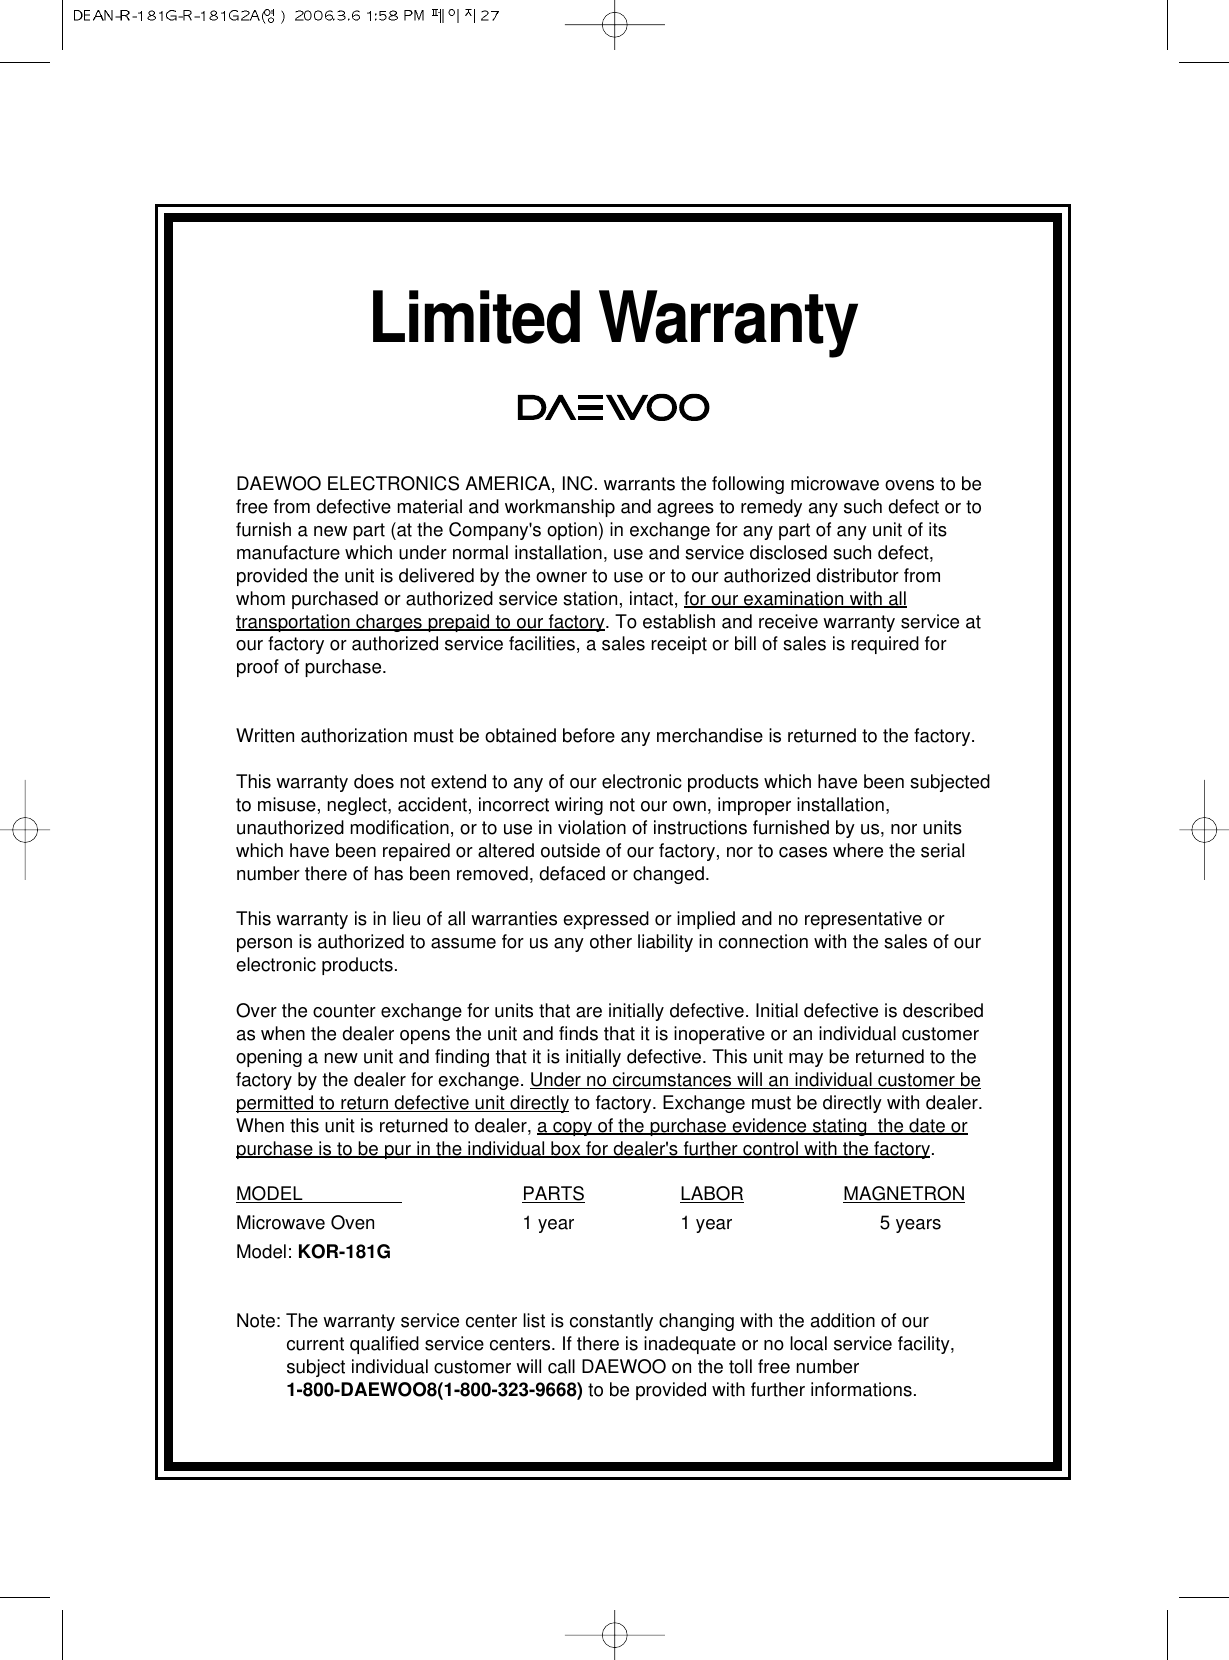 Limited WarrantyDAEWOO ELECTRONICS AMERICA, INC. warrants the following microwave ovens to befree from defective material and workmanship and agrees to remedy any such defect or tofurnish a new part (at the Company&apos;s option) in exchange for any part of any unit of itsmanufacture which under normal installation, use and service disclosed such defect,provided the unit is delivered by the owner to use or to our authorized distributor fromwhom purchased or authorized service station, intact, for our examination with alltransportation charges prepaid to our factory. To establish and receive warranty service atour factory or authorized service facilities, a sales receipt or bill of sales is required forproof of purchase.Written authorization must be obtained before any merchandise is returned to the factory.This warranty does not extend to any of our electronic products which have been subjectedto misuse, neglect, accident, incorrect wiring not our own, improper installation,unauthorized modification, or to use in violation of instructions furnished by us, nor unitswhich have been repaired or altered outside of our factory, nor to cases where the serialnumber there of has been removed, defaced or changed.This warranty is in lieu of all warranties expressed or implied and no representative orperson is authorized to assume for us any other liability in connection with the sales of ourelectronic products.Over the counter exchange for units that are initially defective. Initial defective is describedas when the dealer opens the unit and finds that it is inoperative or an individual customeropening a new unit and finding that it is initially defective. This unit may be returned to thefactory by the dealer for exchange. Under no circumstances will an individual customer bepermitted to return defective unit directly to factory. Exchange must be directly with dealer.When this unit is returned to dealer, a copy of the purchase evidence stating  the date orpurchase is to be pur in the individual box for dealer&apos;s further control with the factory.MODEL                    PARTS LABOR MAGNETRONMicrowave Oven 1 year 1 year 5 yearsModel: KOR-181GNote: The warranty service center list is constantly changing with the addition of ourcurrent qualified service centers. If there is inadequate or no local service facility,subject individual customer will call DAEWOO on the toll free number1-800-DAEWOO8(1-800-323-9668) to be provided with further informations.